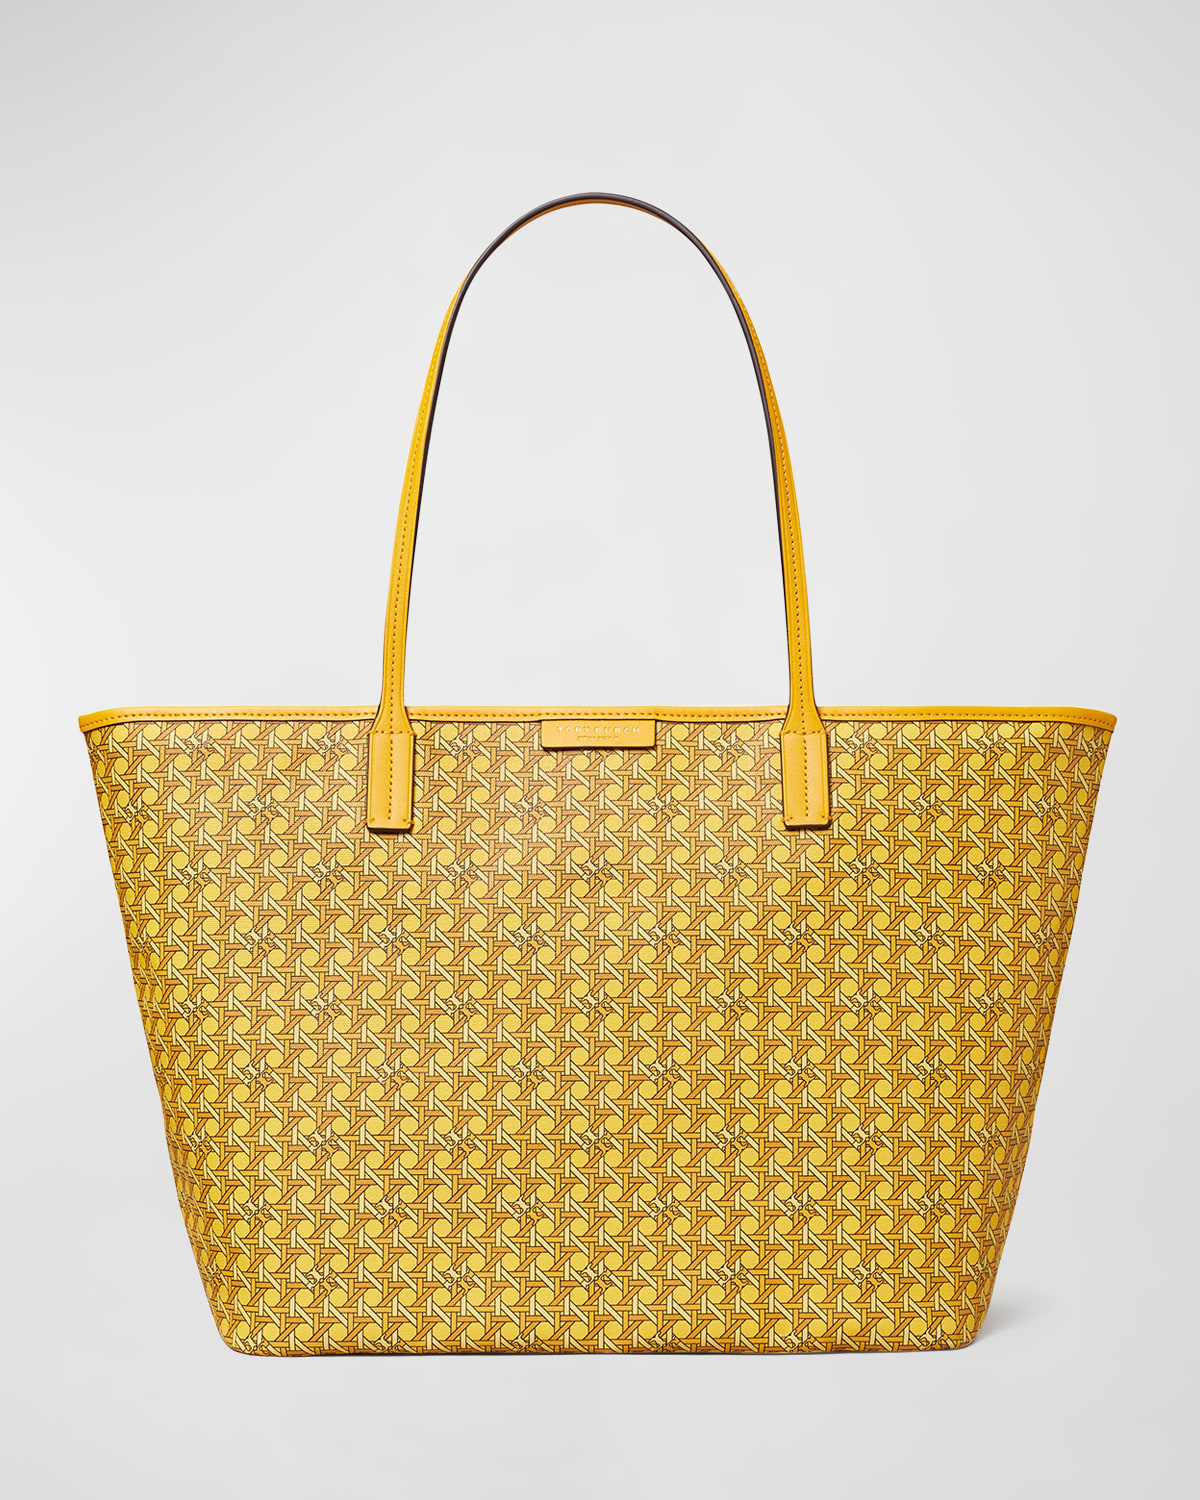 Tory Burch Every-ready Woven Monogram Tote Bag In Sunset Glow